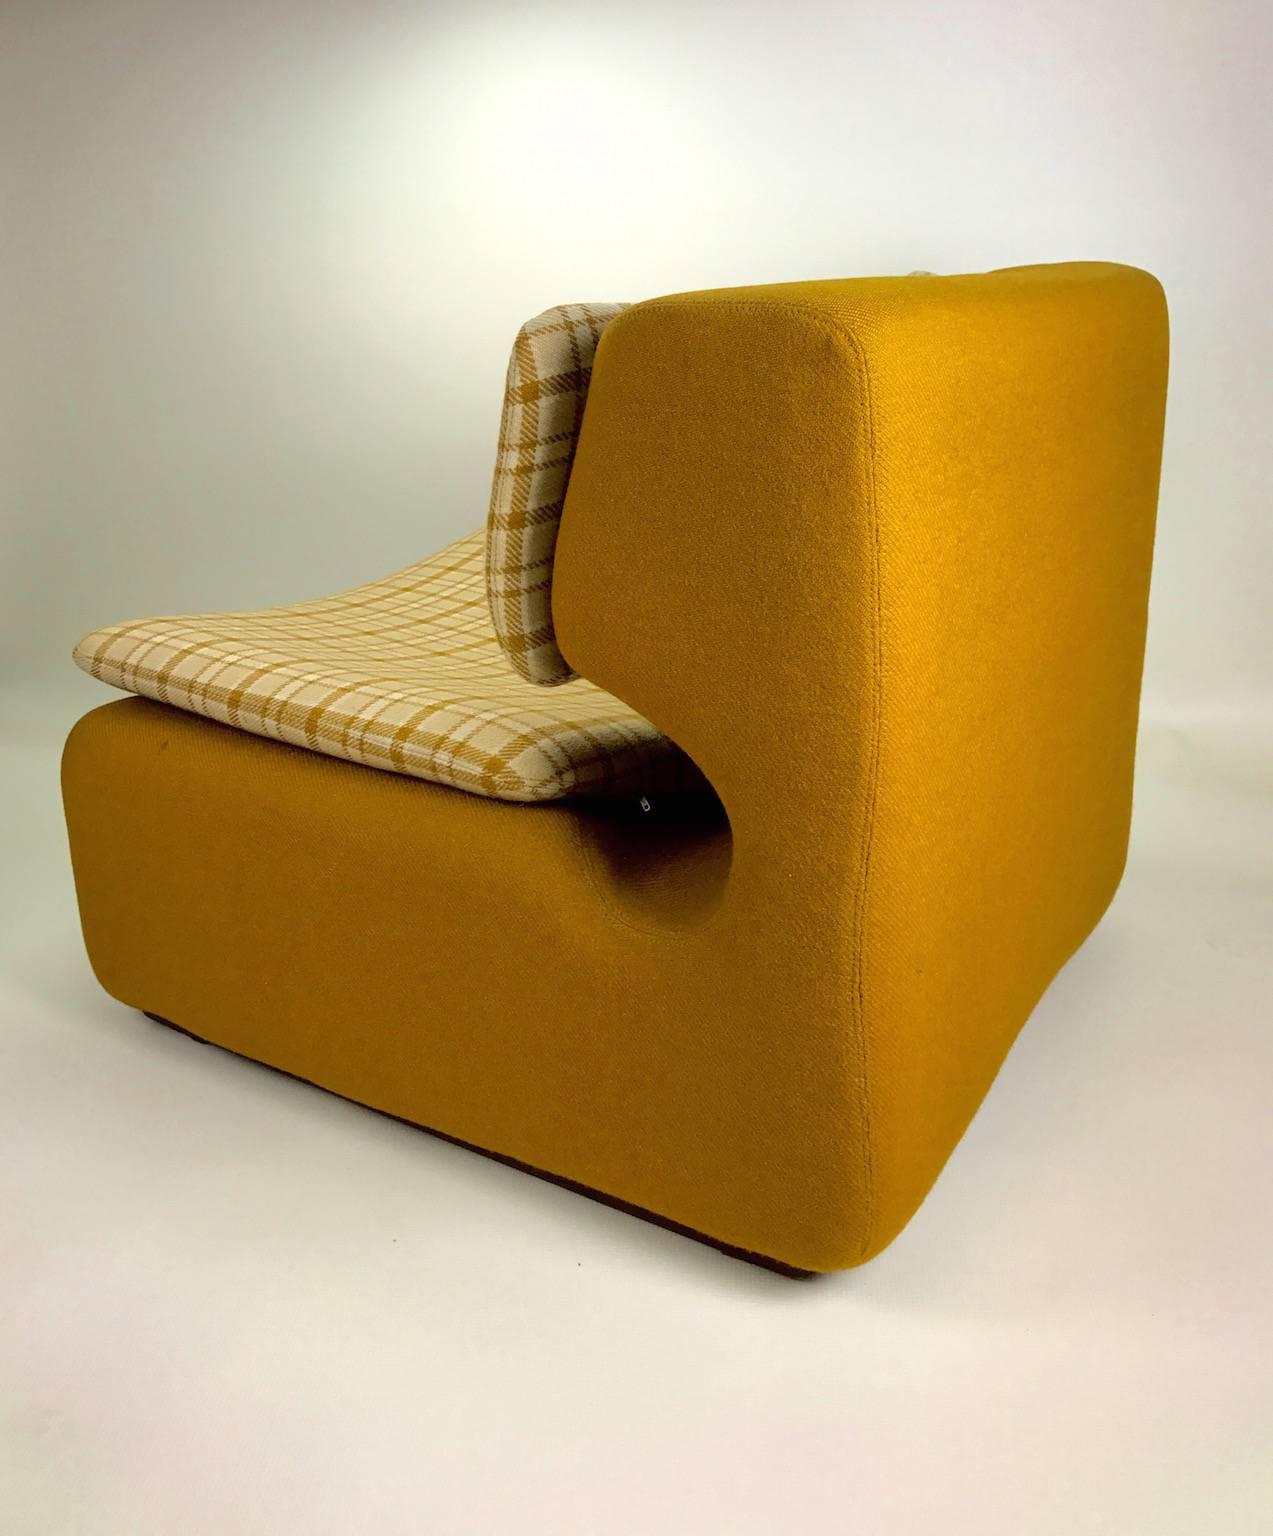 Lounge chair made from Styrofoam / polystyrene and with wool fabric upholstery. 

Spage Age 1970s German production in style of Don Chadwick.

Conditon: Close to mint condition. Very few age related signs of use. 

Size: Height 67cm, width